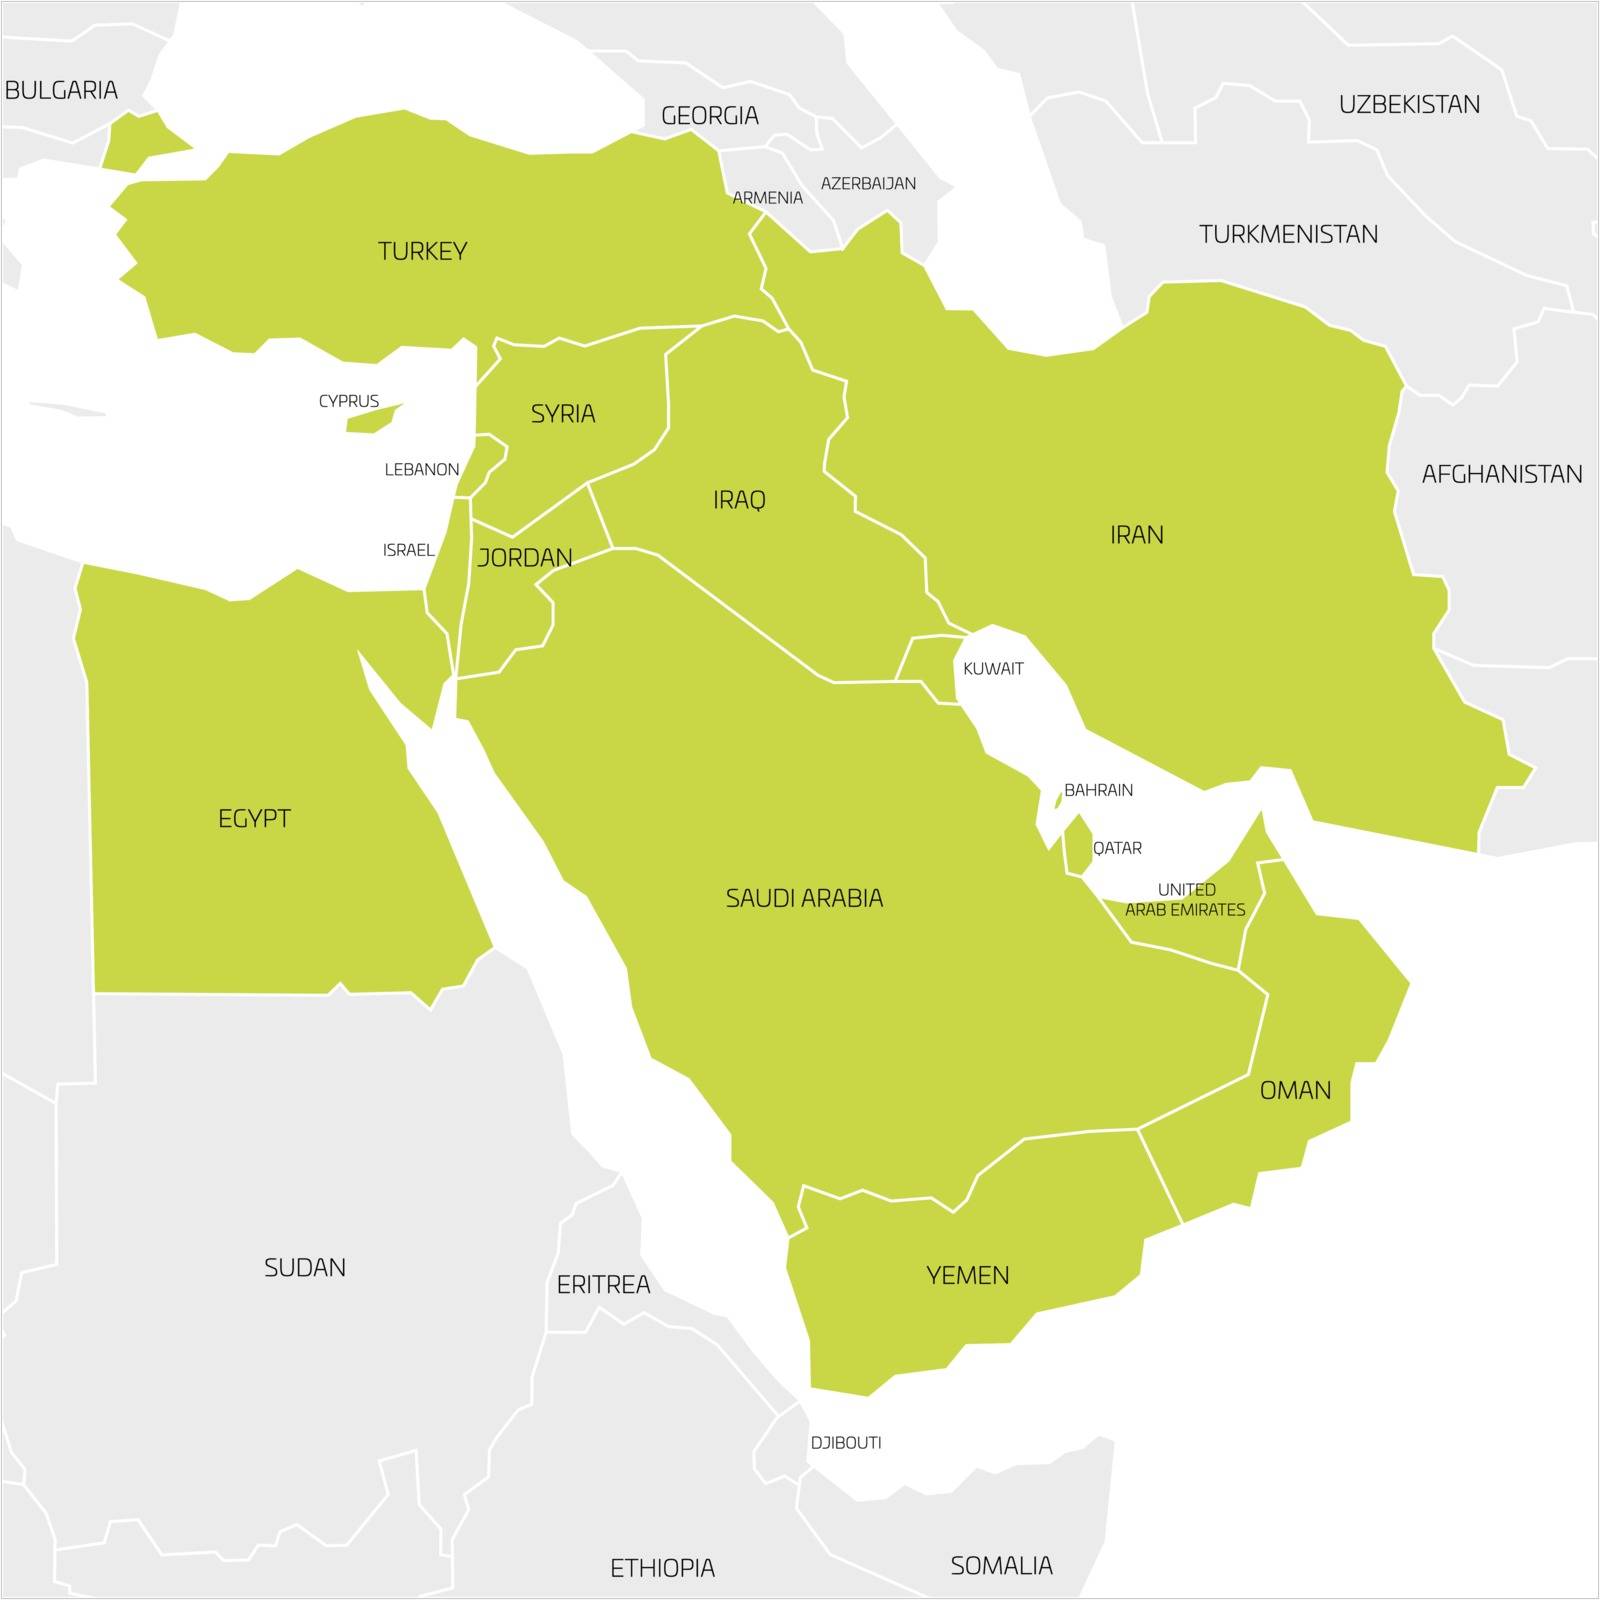 Map of Middle East or Near East transcontinental region with green highlighted Western Asia countries, Turkey, Cyprus and Egypt. Flat map with thin white state borders.